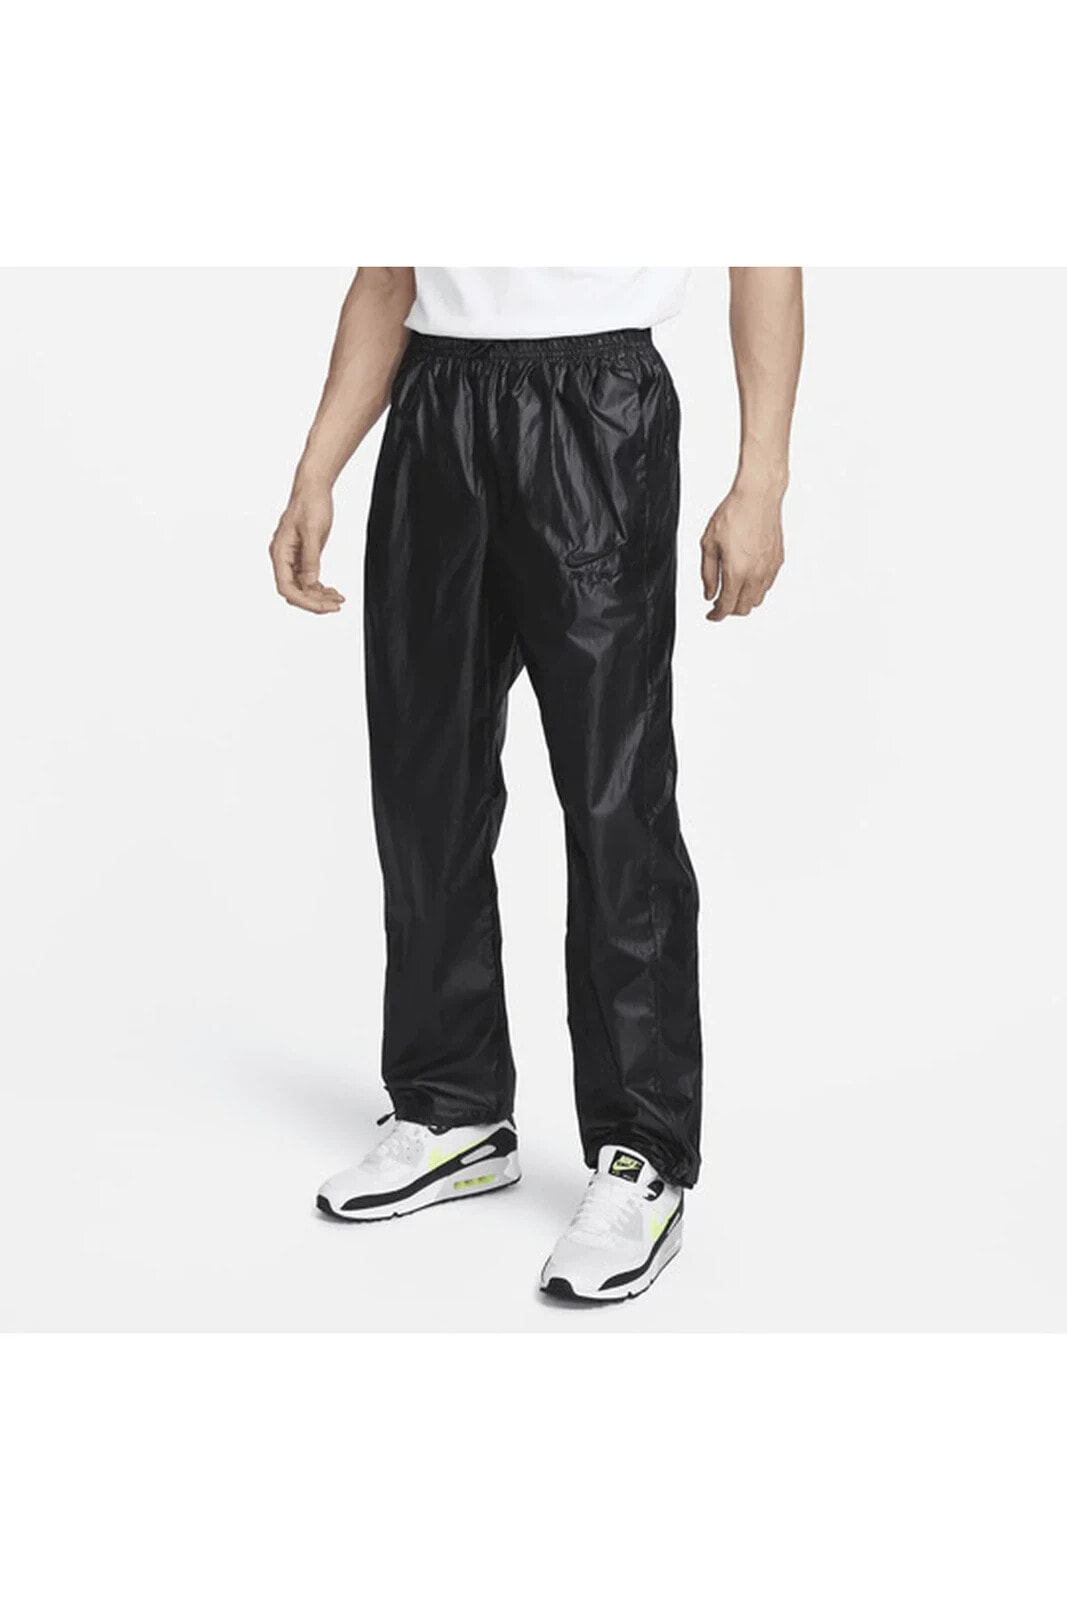 Air Men's Woven Trousers